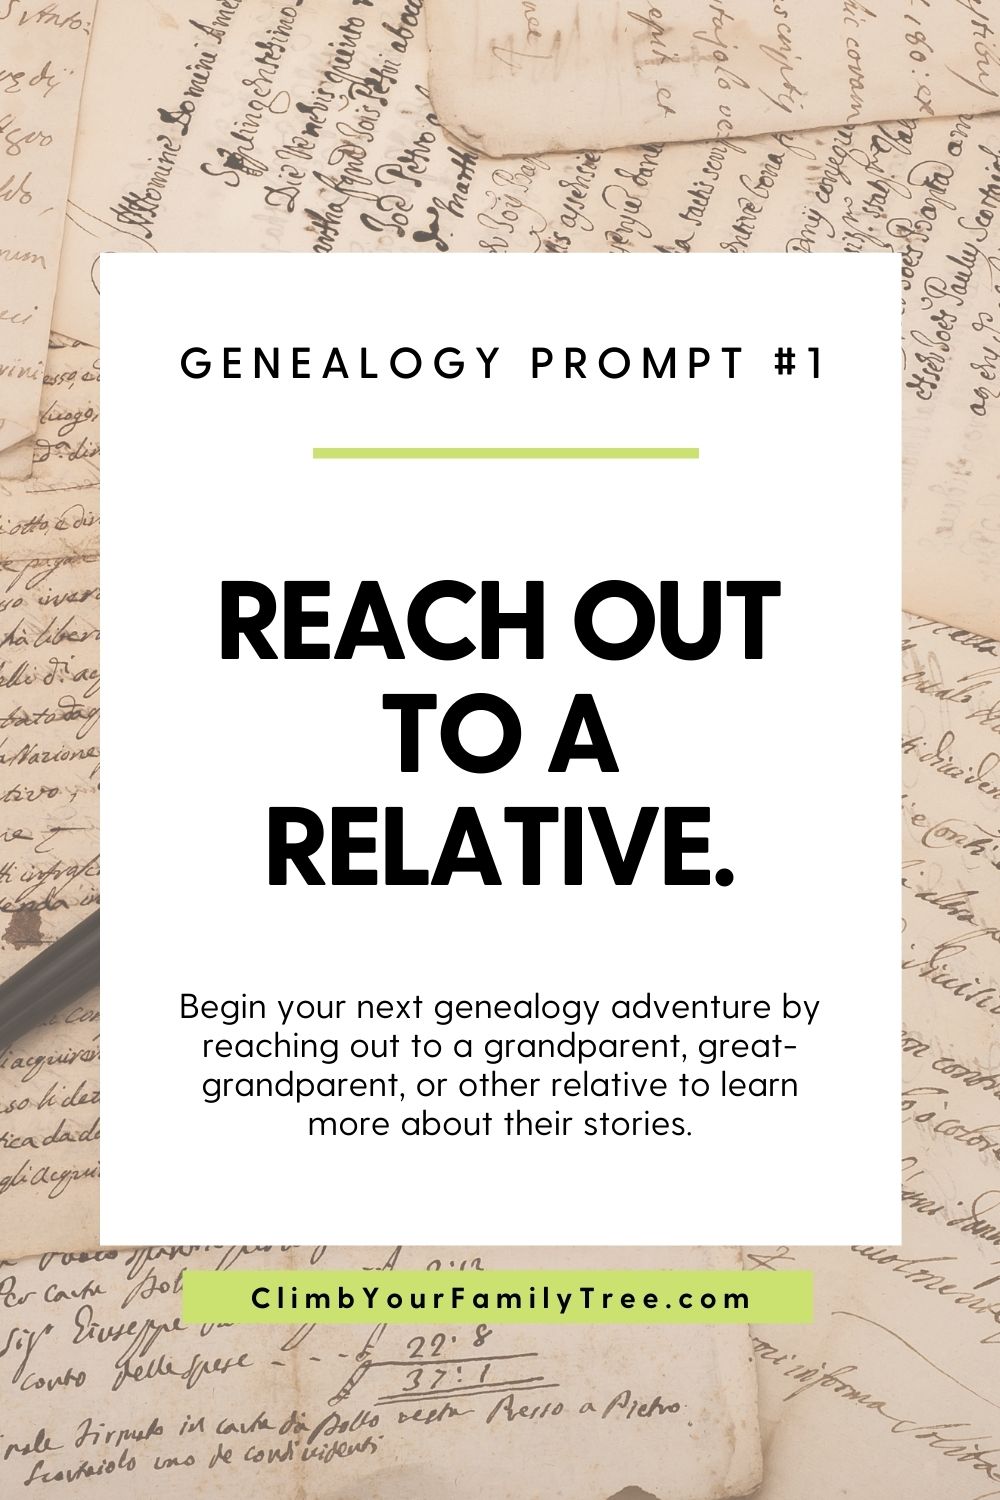 Genealogy Prompt 1 - Reach Out to a Relative - Begin your next genealogy adventure by reaching out to a grandparent, great-grandparent, or other relative to learn more about their stories - ClimbYourFamilyTree.com